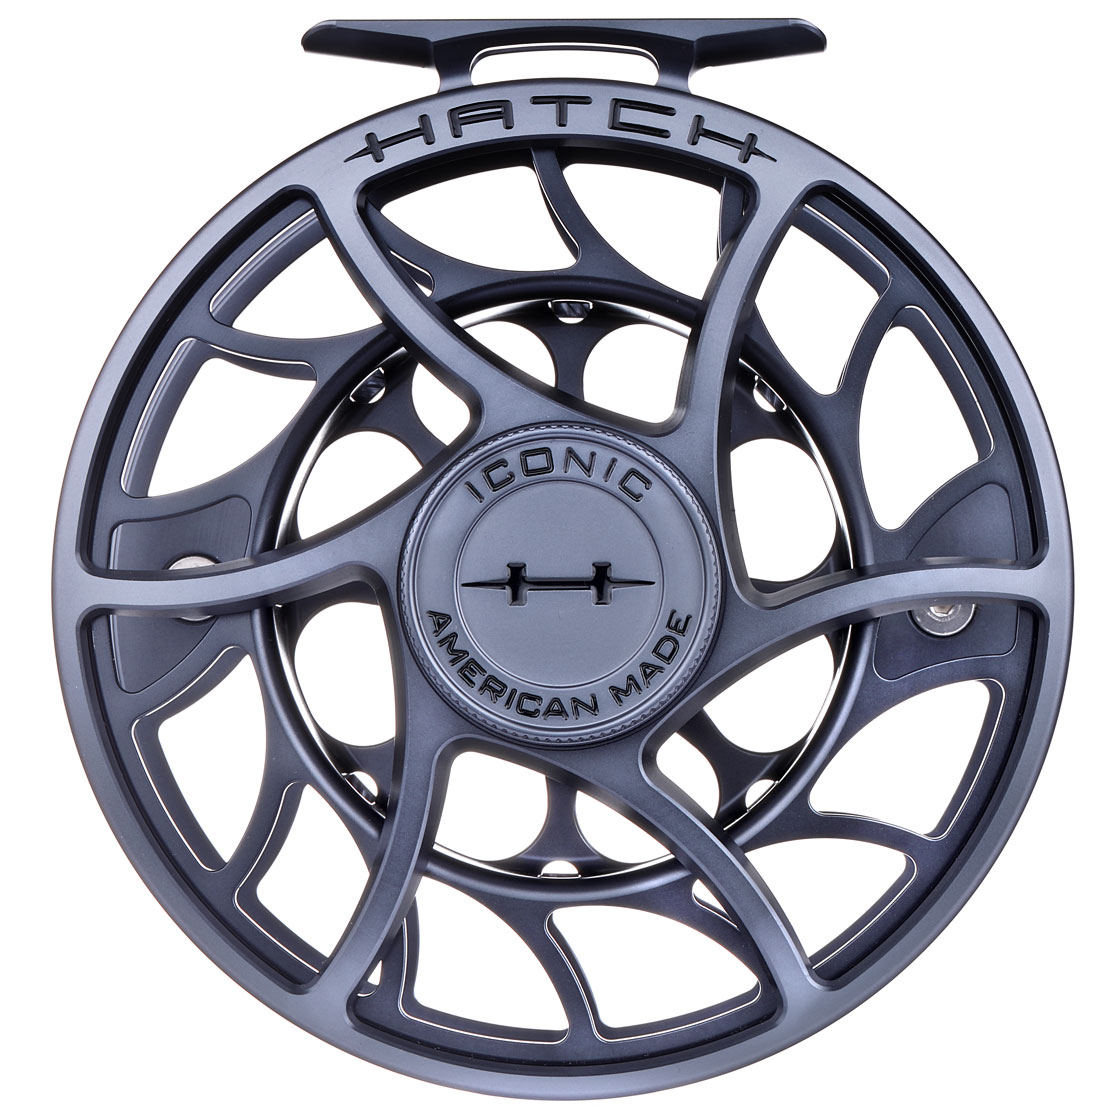 Hatch Iconic Fly Reel Large Arbor gray/black, Reels